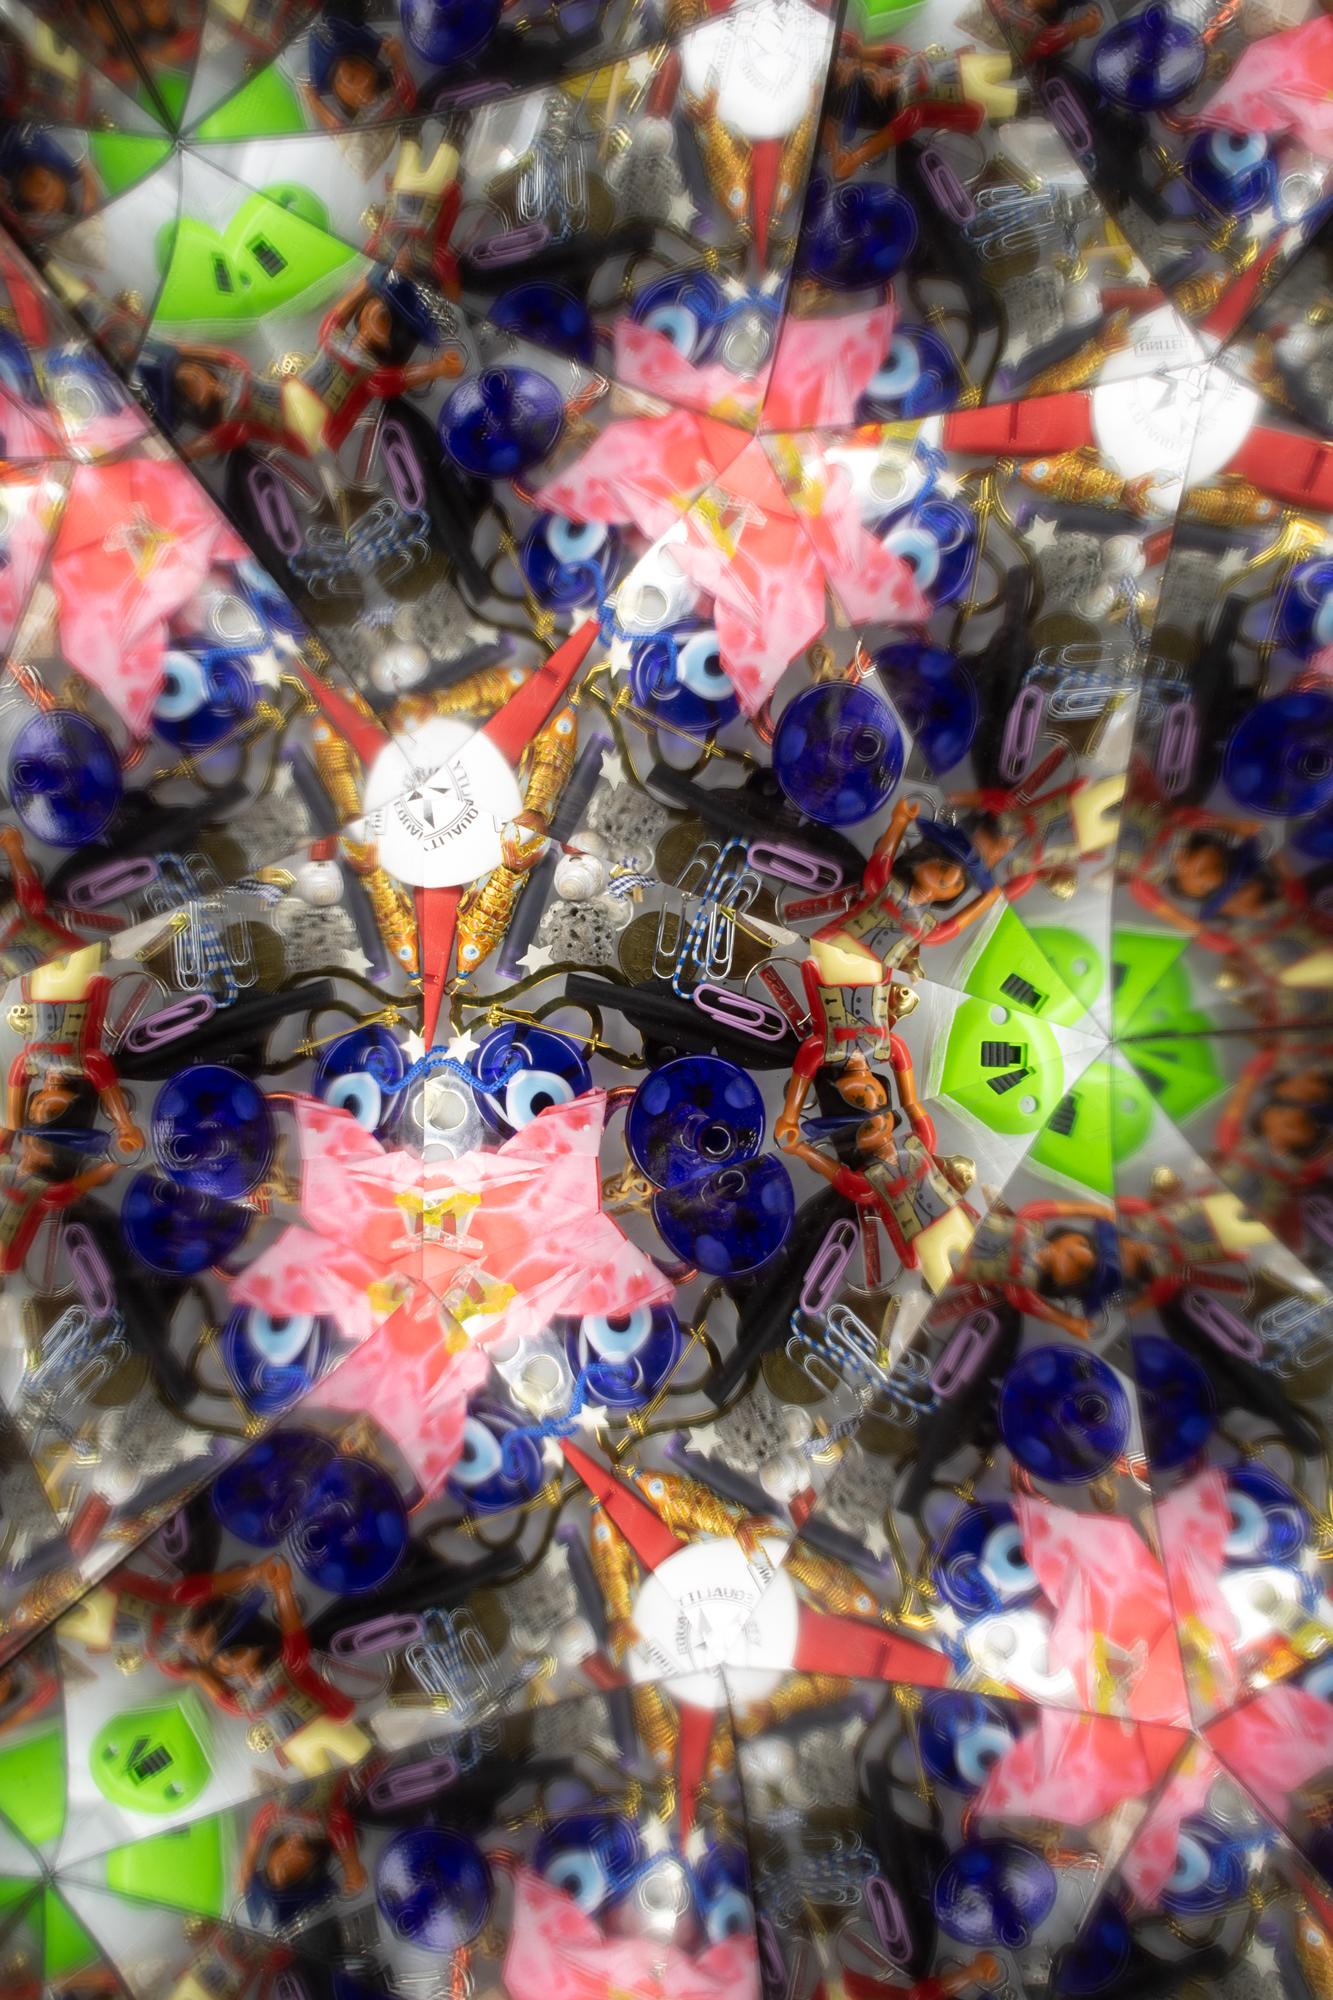 Anna Tas Abstract Photograph - "In Praise of Entropy (Untitled #6)", Lenticular transition, Kaleidoscope